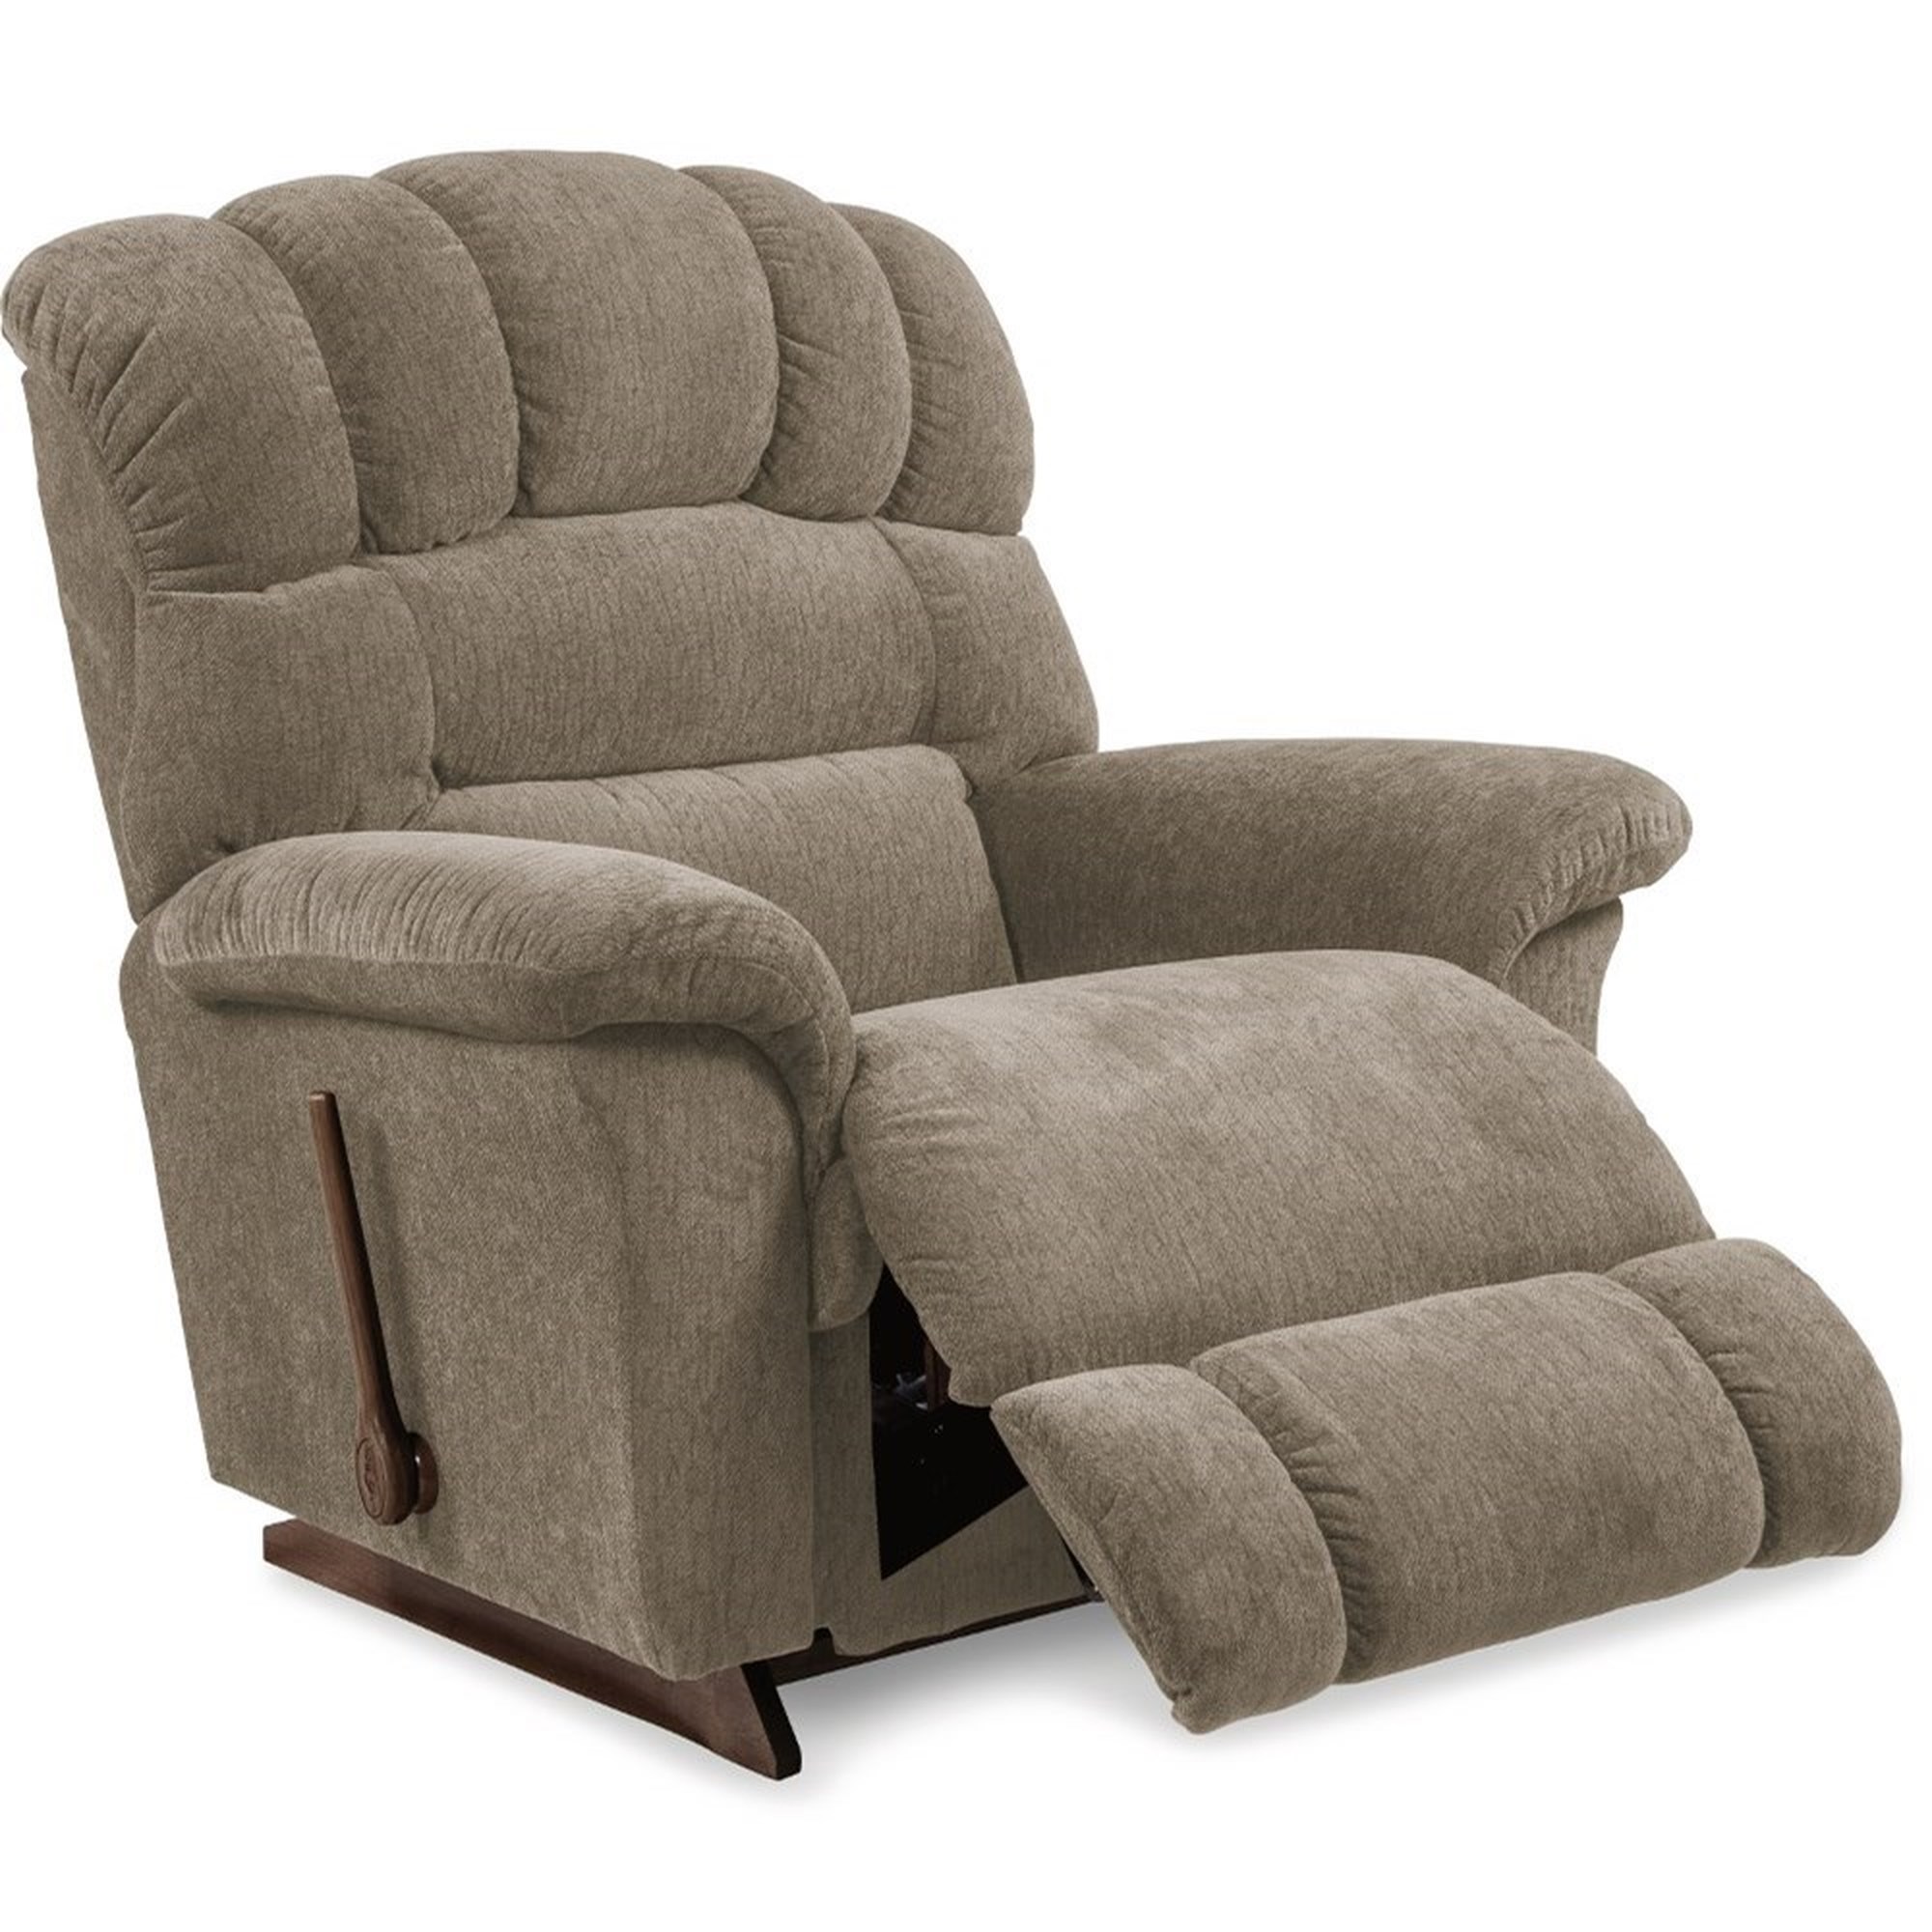 Largest Lift Chair Supplier in Minneapolis